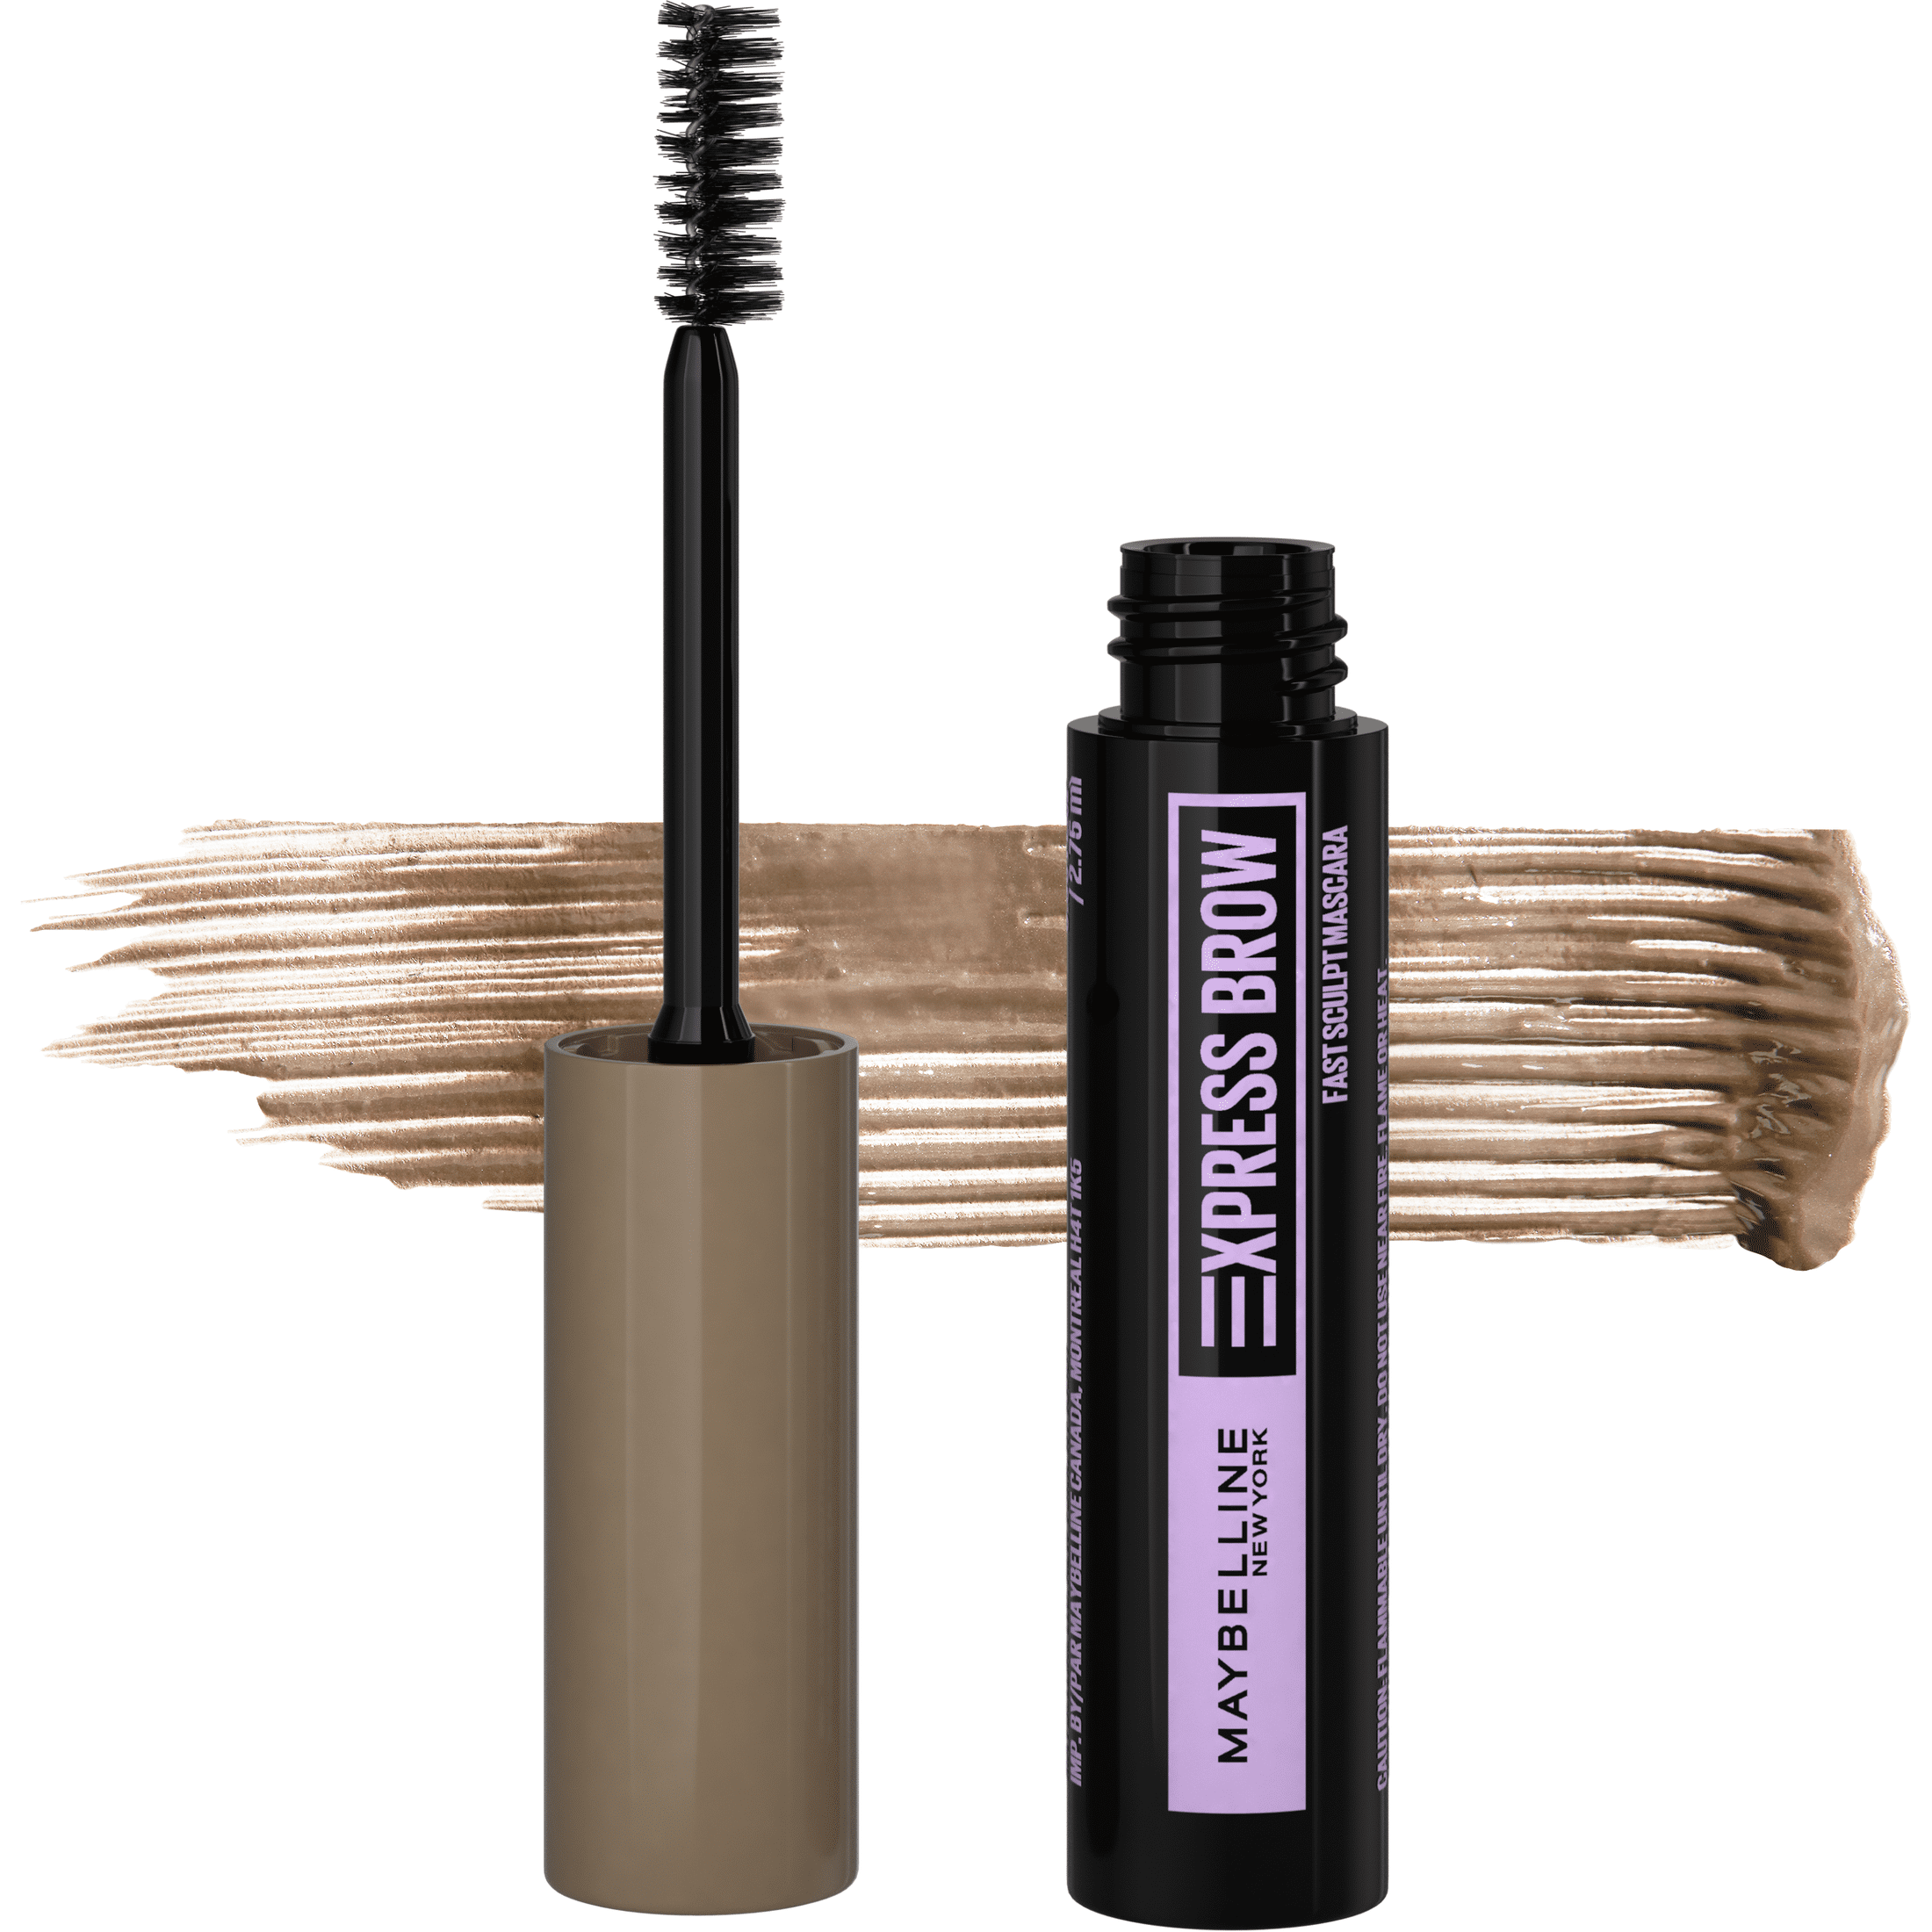 Makeup Maybelline Brow Drama